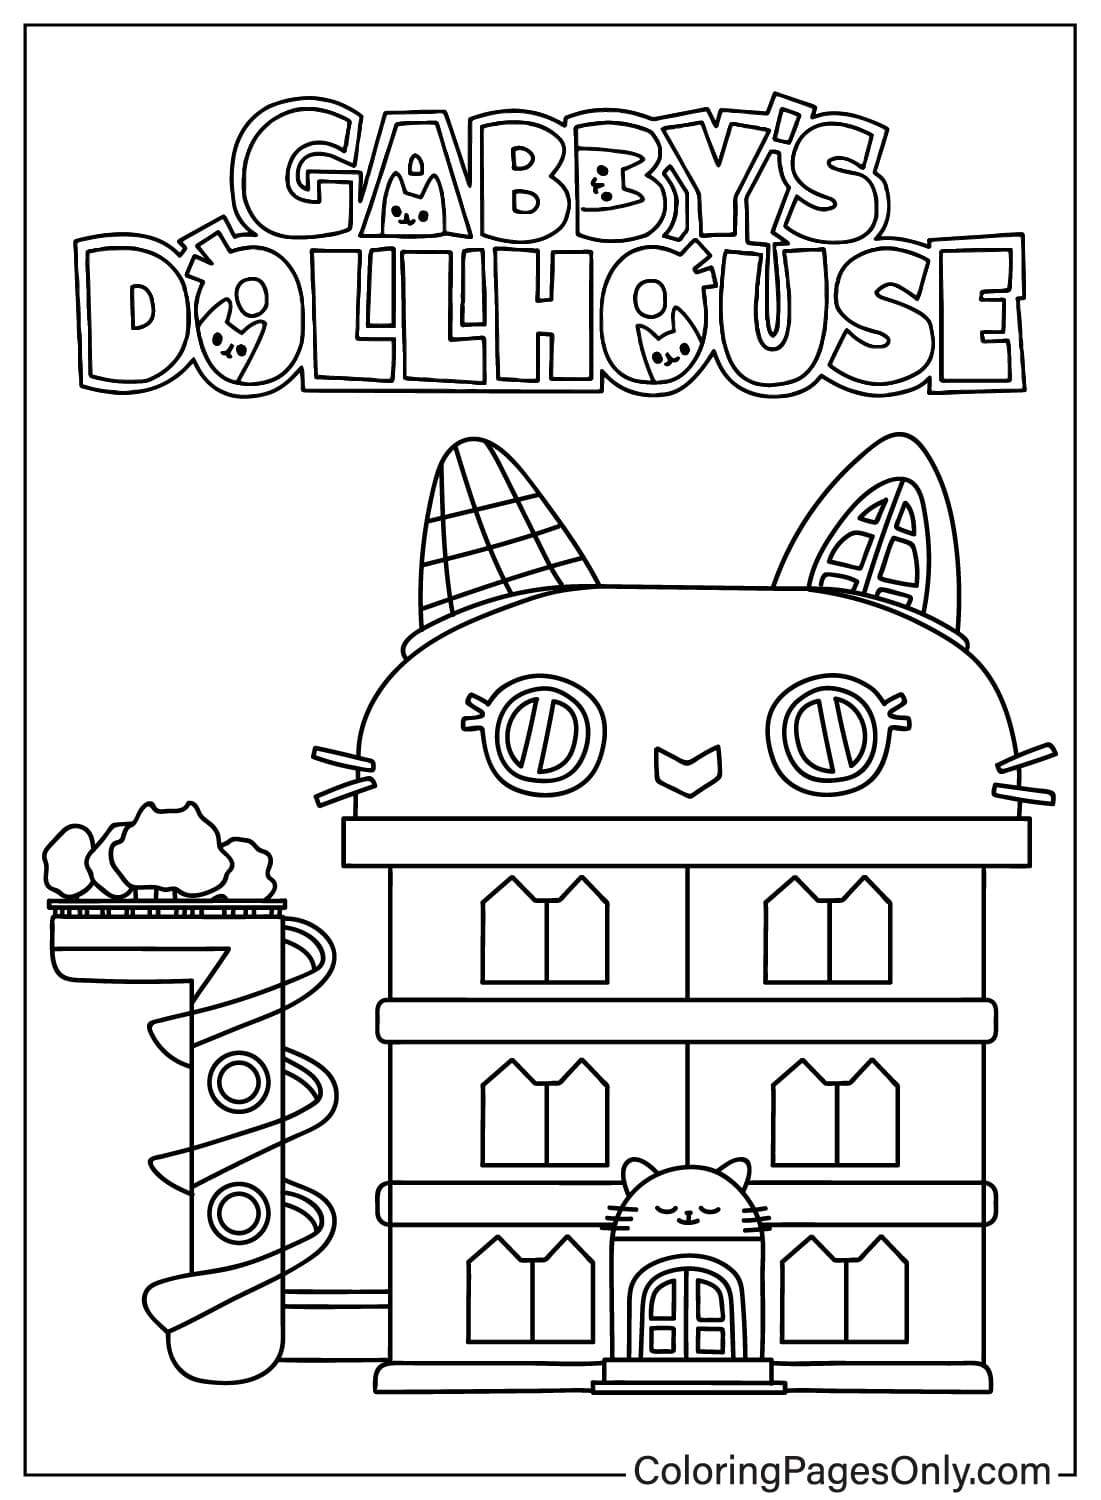 Gabby’s Dollhouse Coloring Page Free from Gabby's Dollhouse